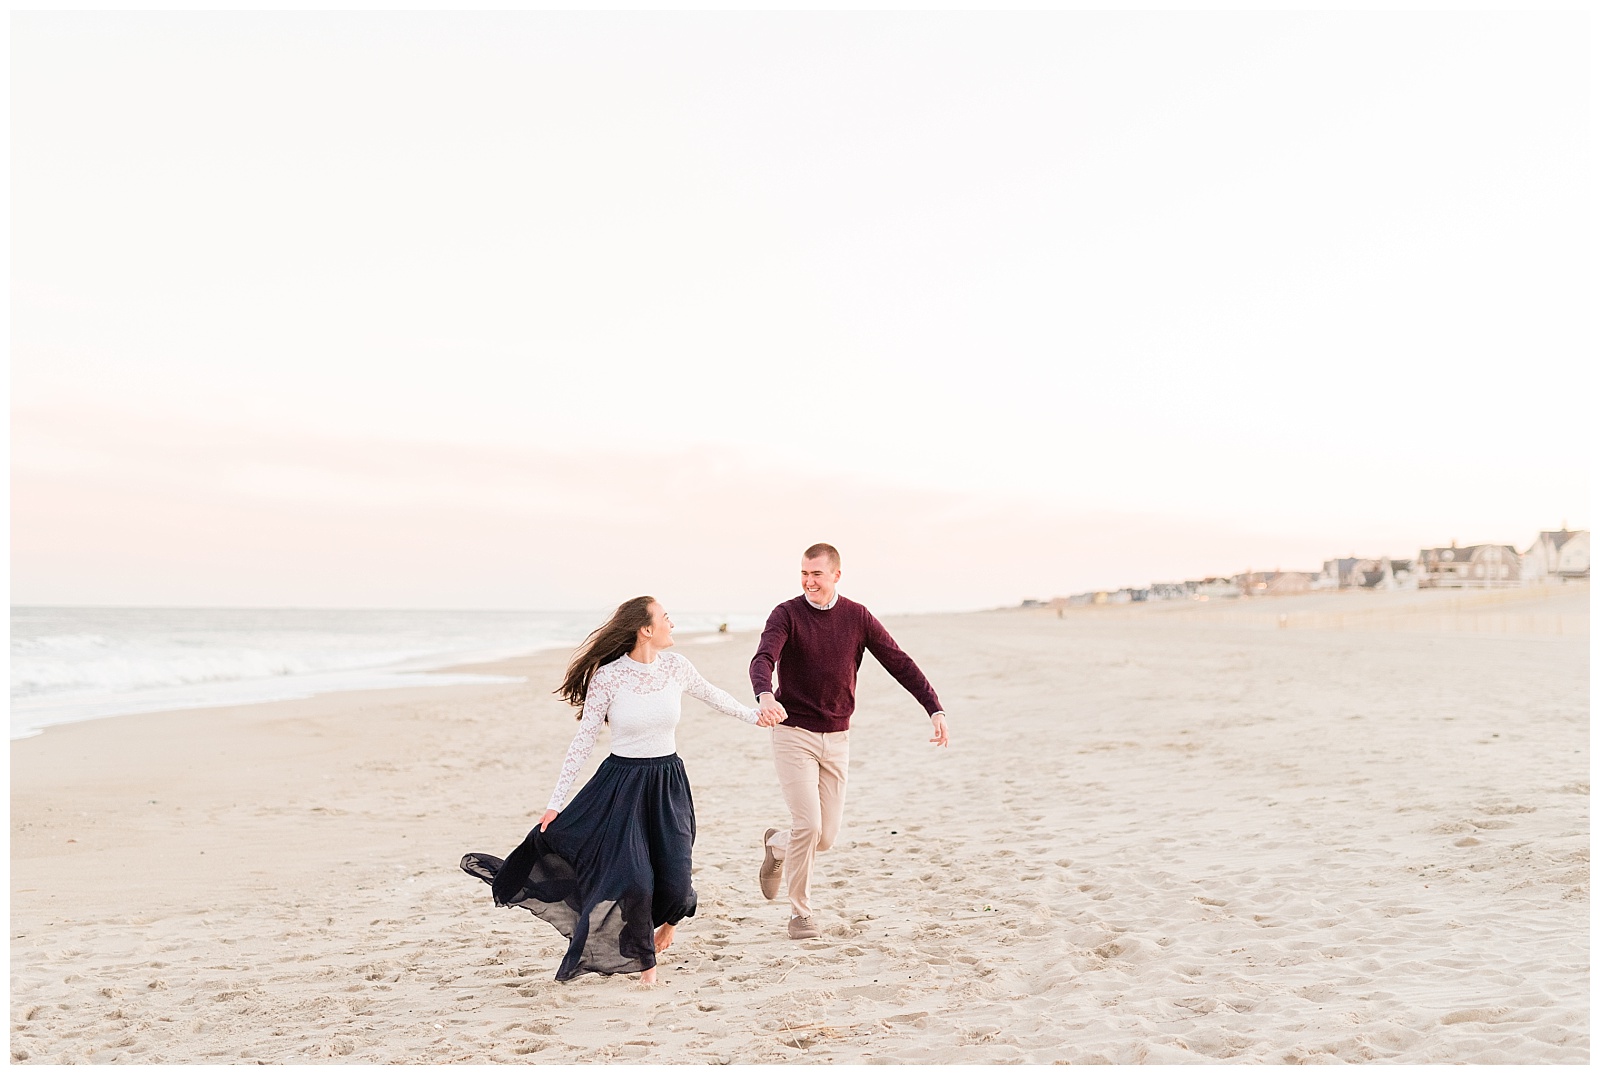 New Jersey, Engagement Session, Wedding Photographer, Beach, Sunset, Shore, Play, Laugh